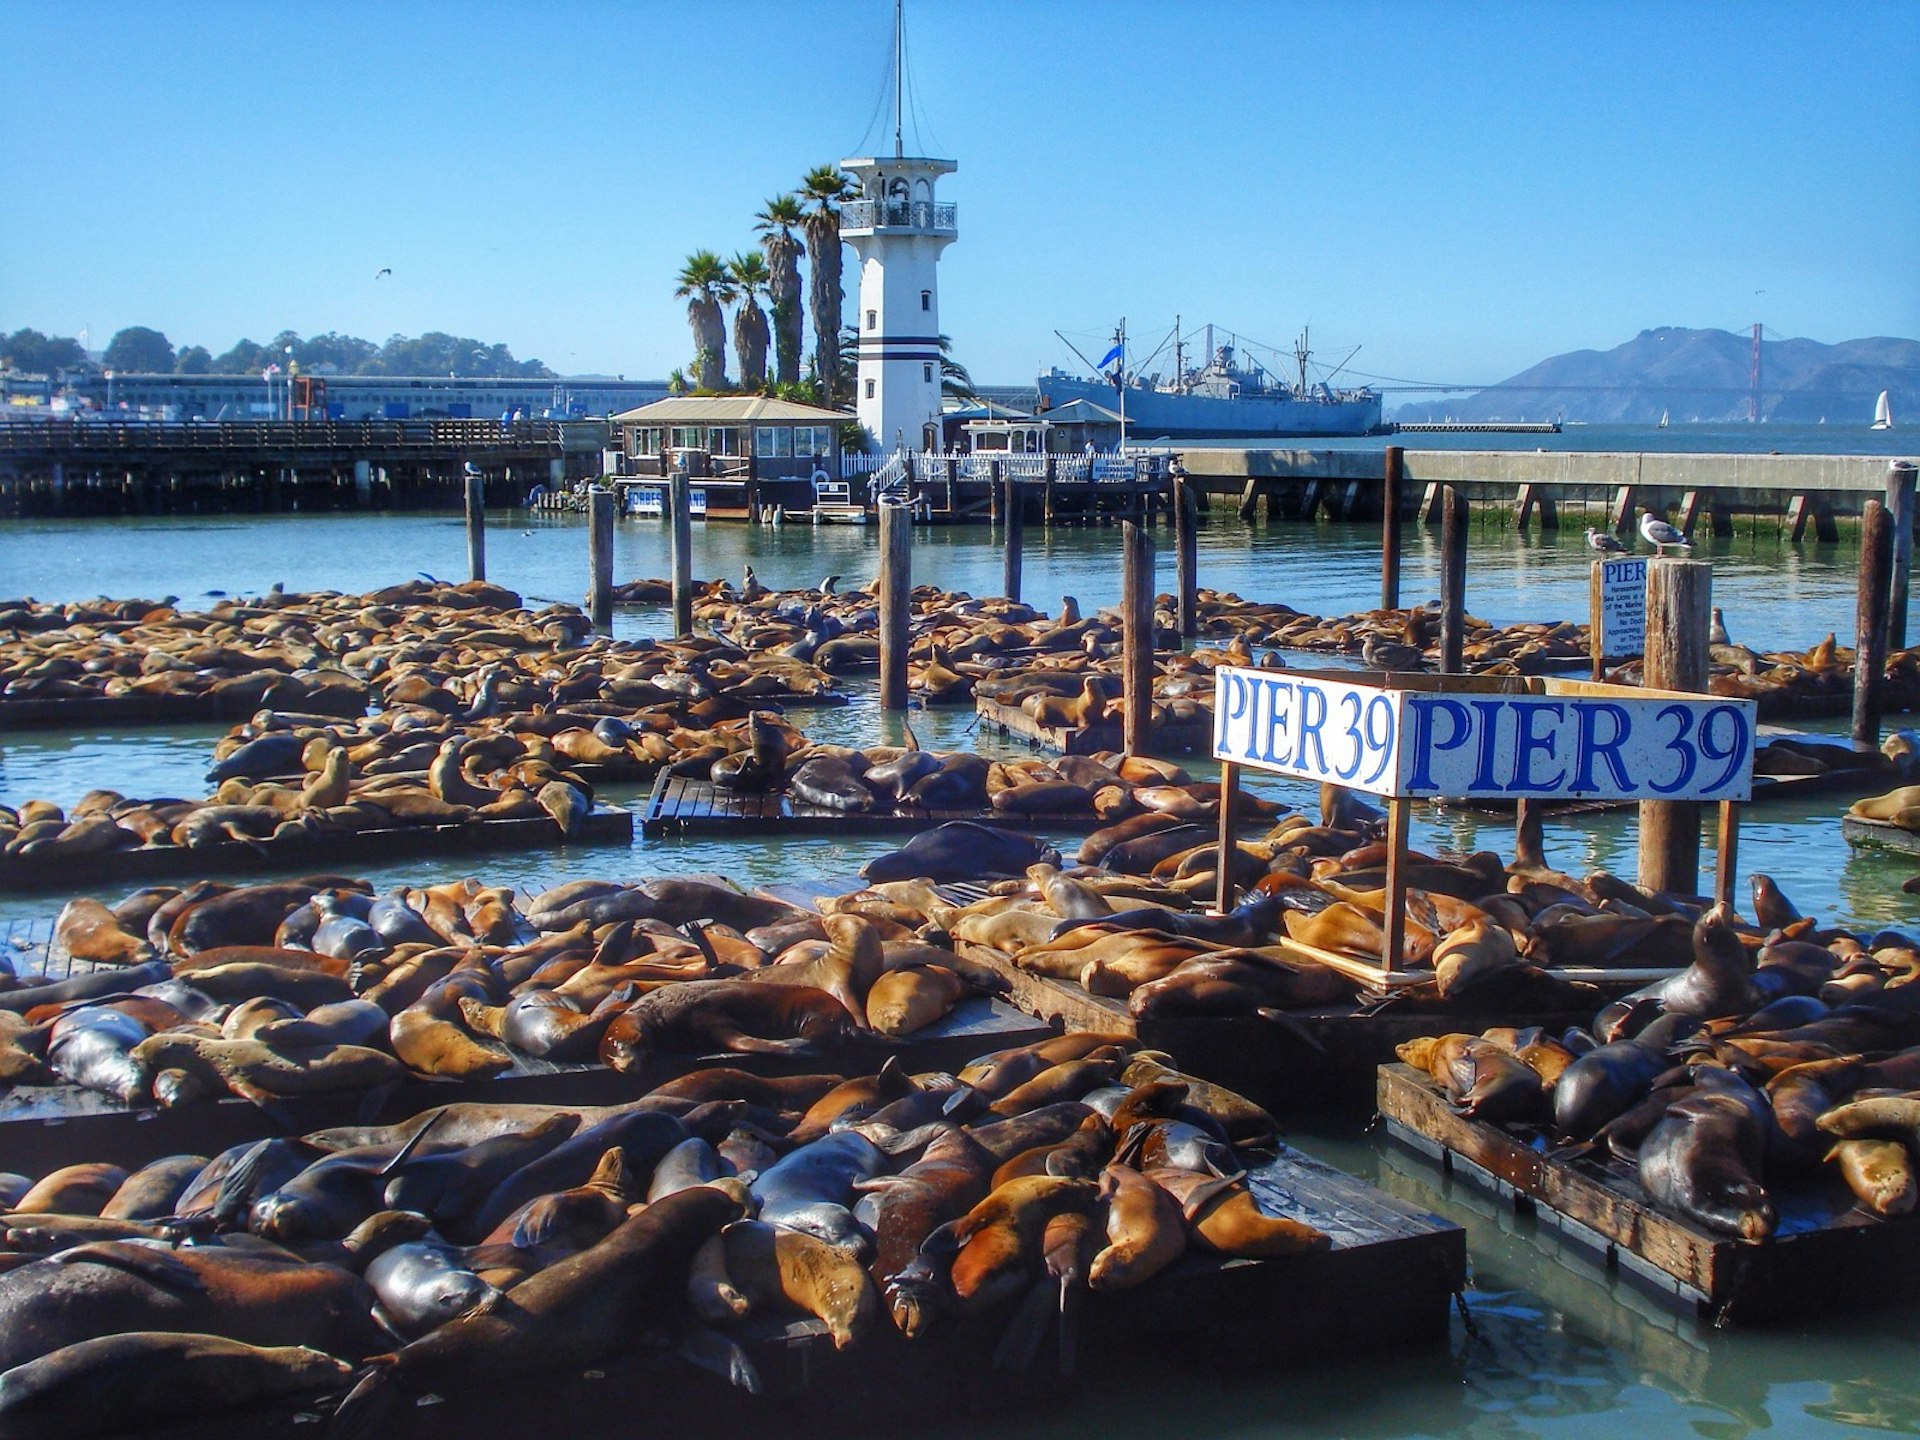 So many sealions piled on top of one another on a wooden pier in San Fransisco